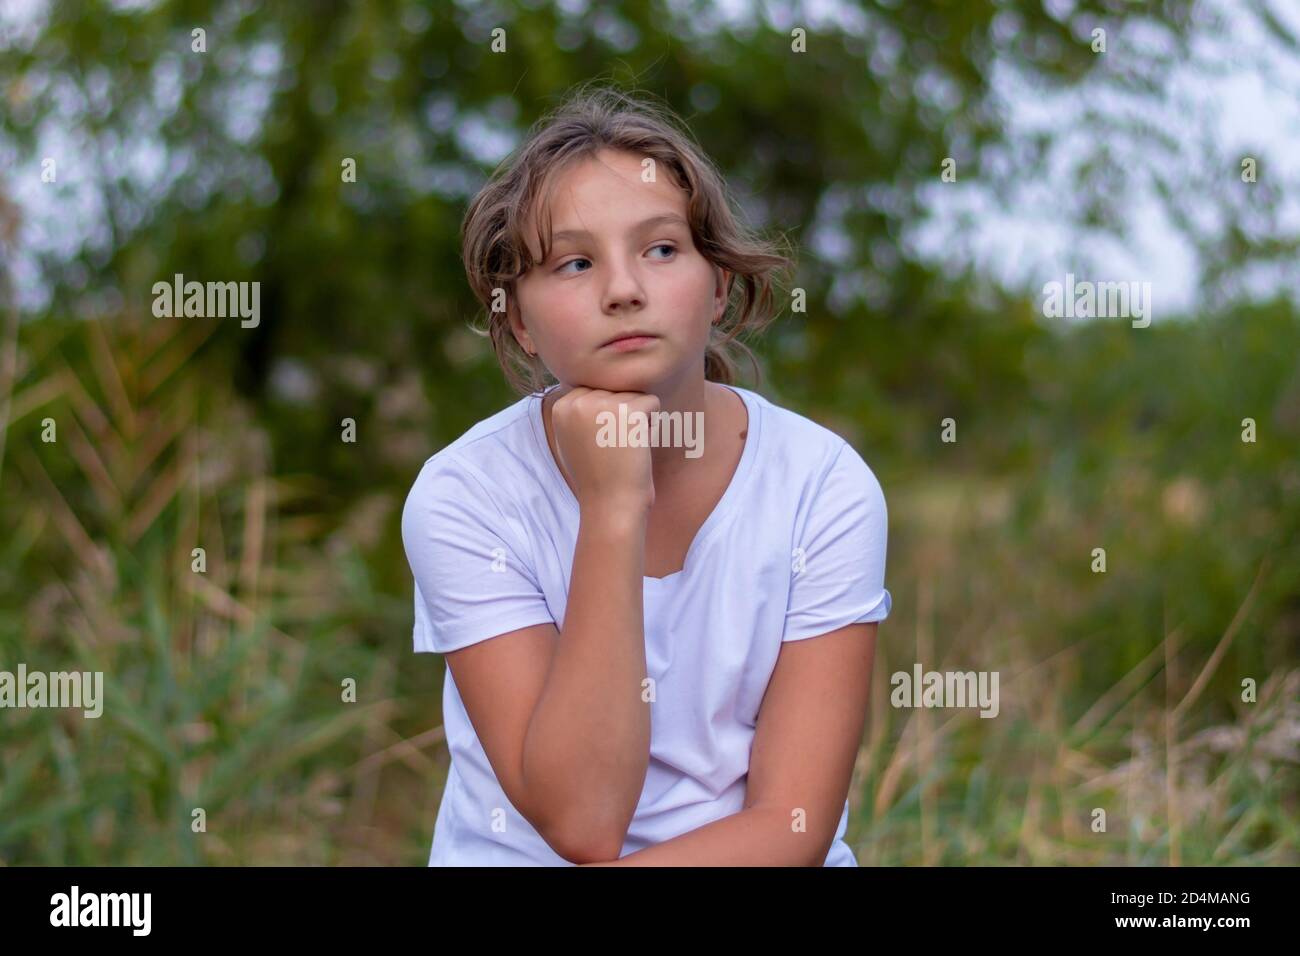 Pensive sad teenager girl looks to the side. Portrait in the park outdoors. Emotions, feelings concept. Blurred background. Stock Photo